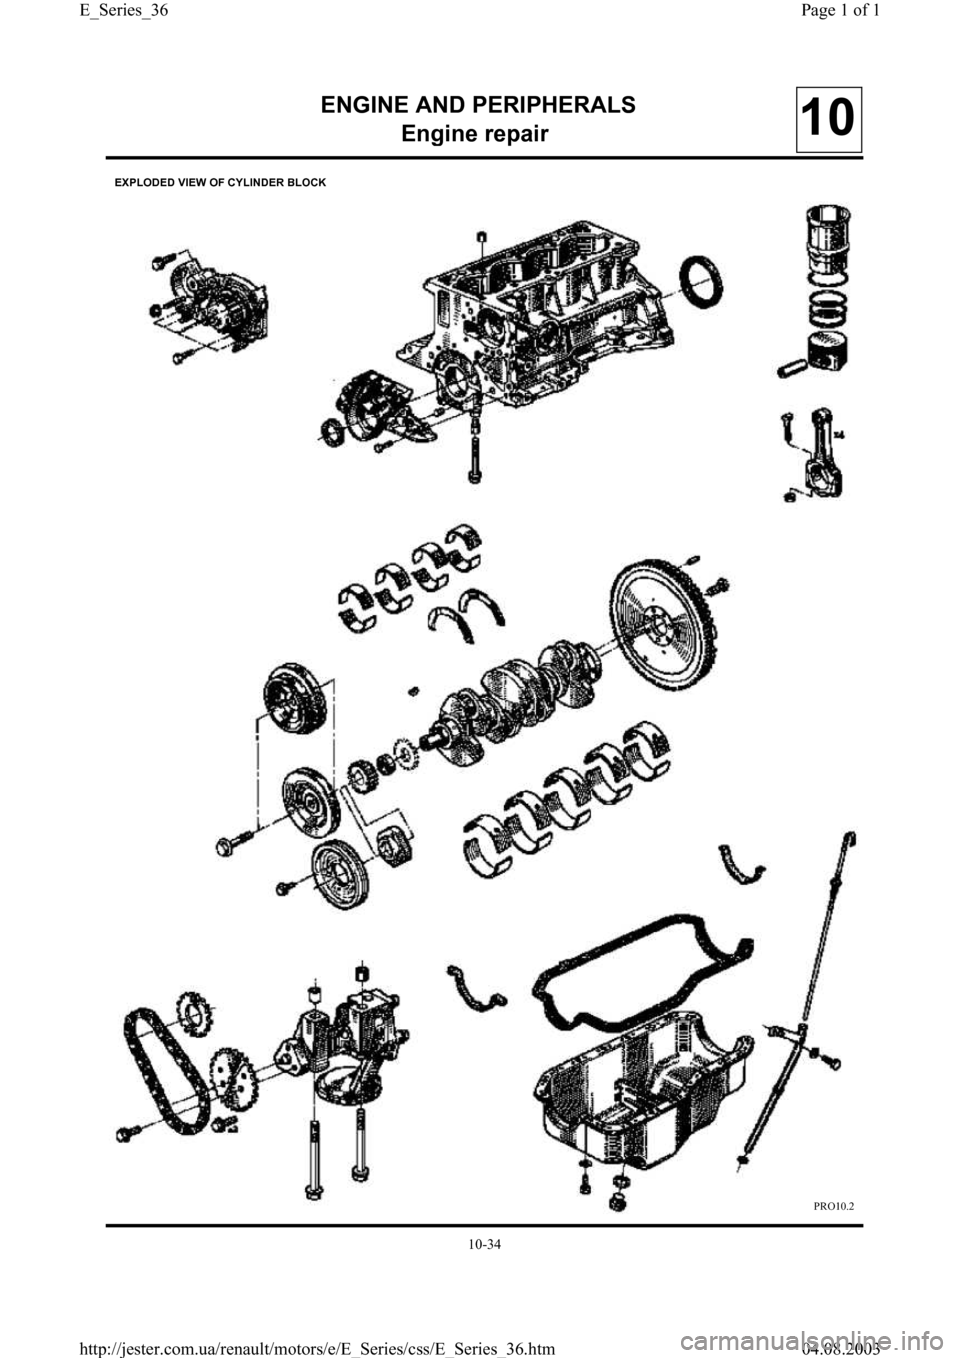 RENAULT CLIO 1997 X57 / 1.G Petrol Engines Workshop Manual ENGINE AND PERIPHERALS
En
gine repair10
EXPLODED VIEW OF CYLINDER BLOCK
PRO10.2
10-34
Page 1 of 1 E_Series_36
04.08.2003 http://jester.com.ua/renault/motors/e/E_Series/css/E_Series_36.htm 